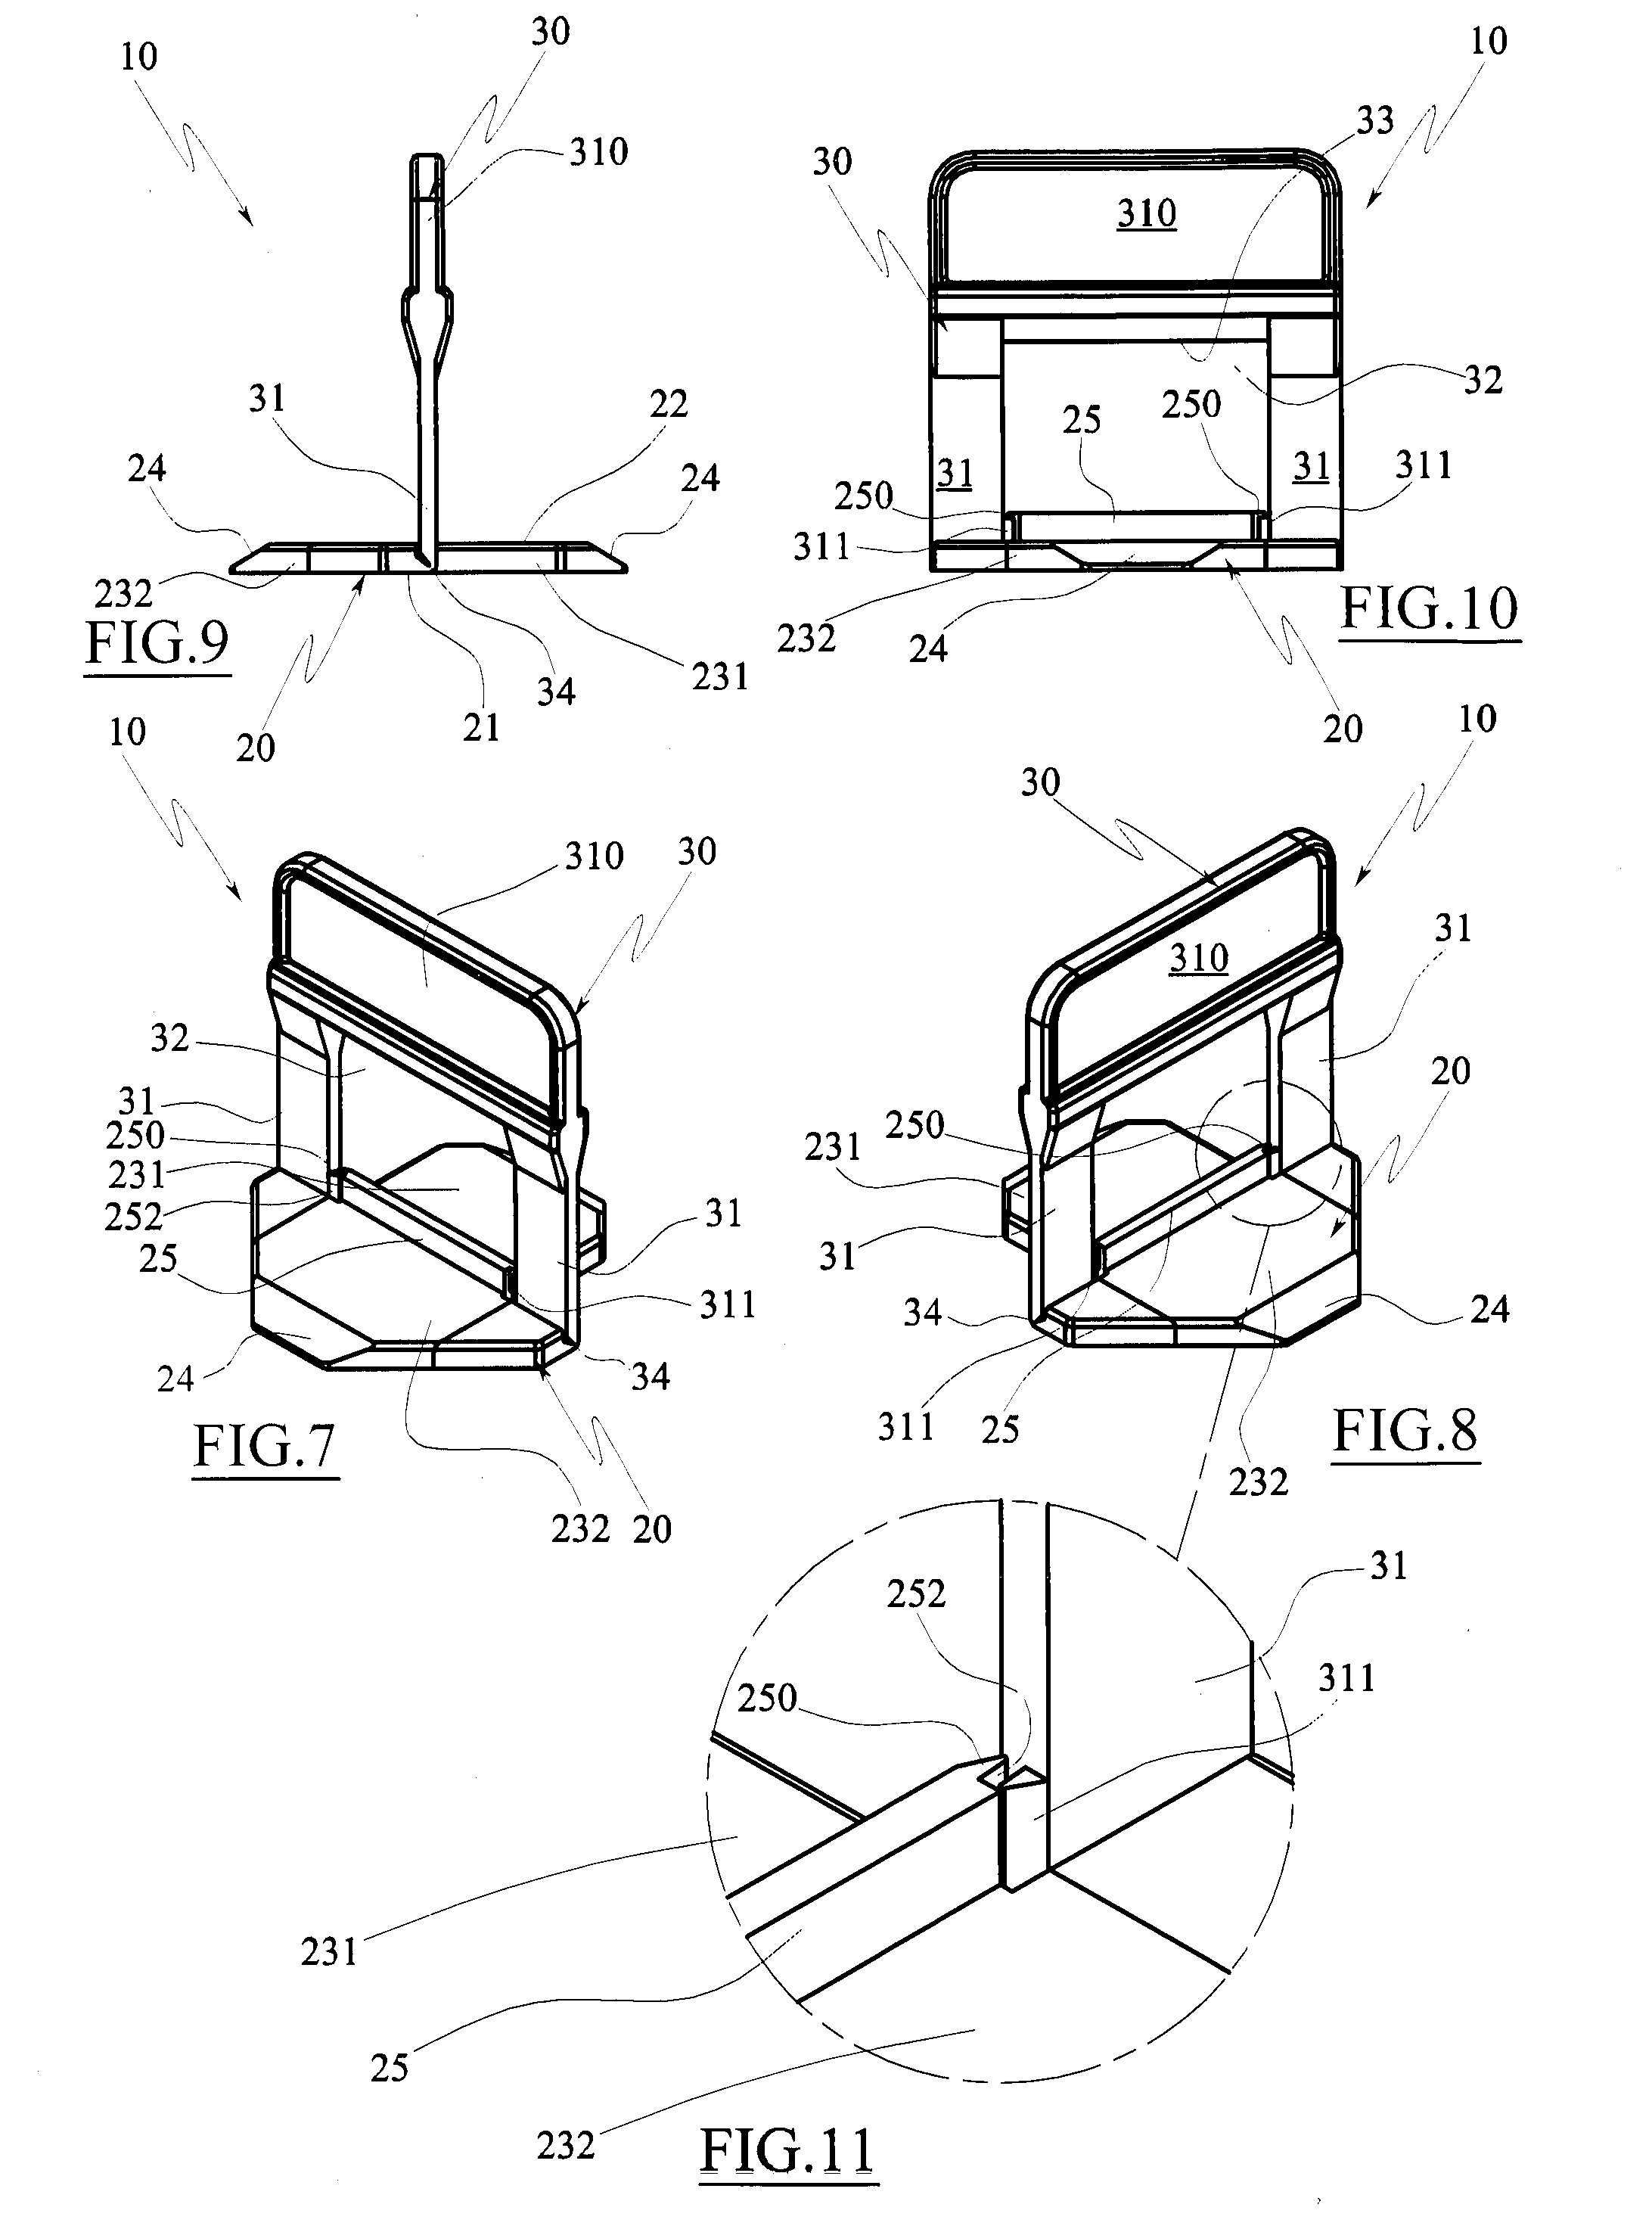 Levelling spacer device for laying slab products for cladding surfaces